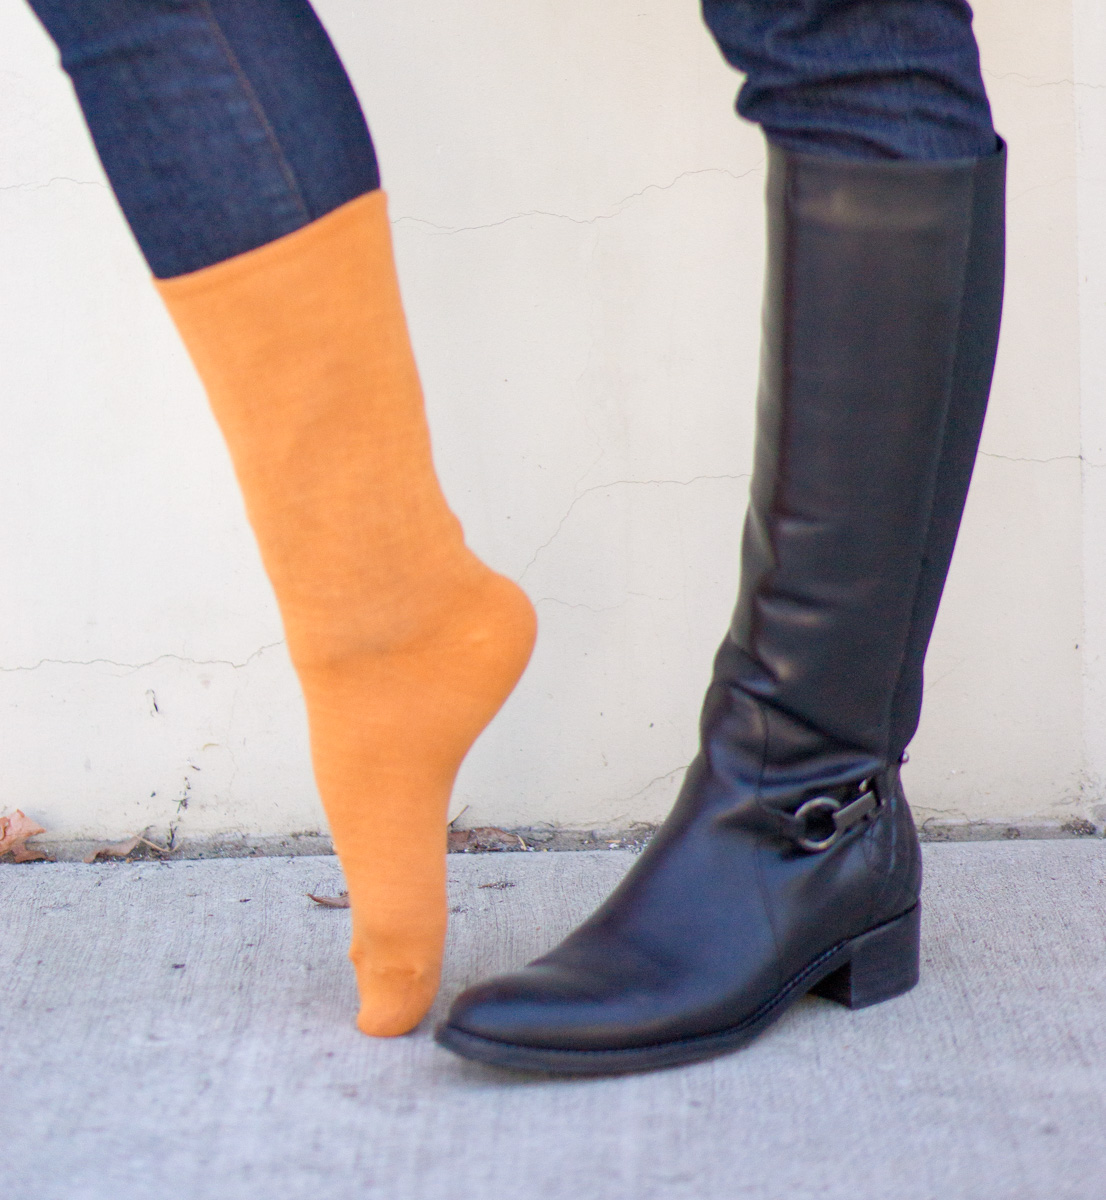 socks for tall boots